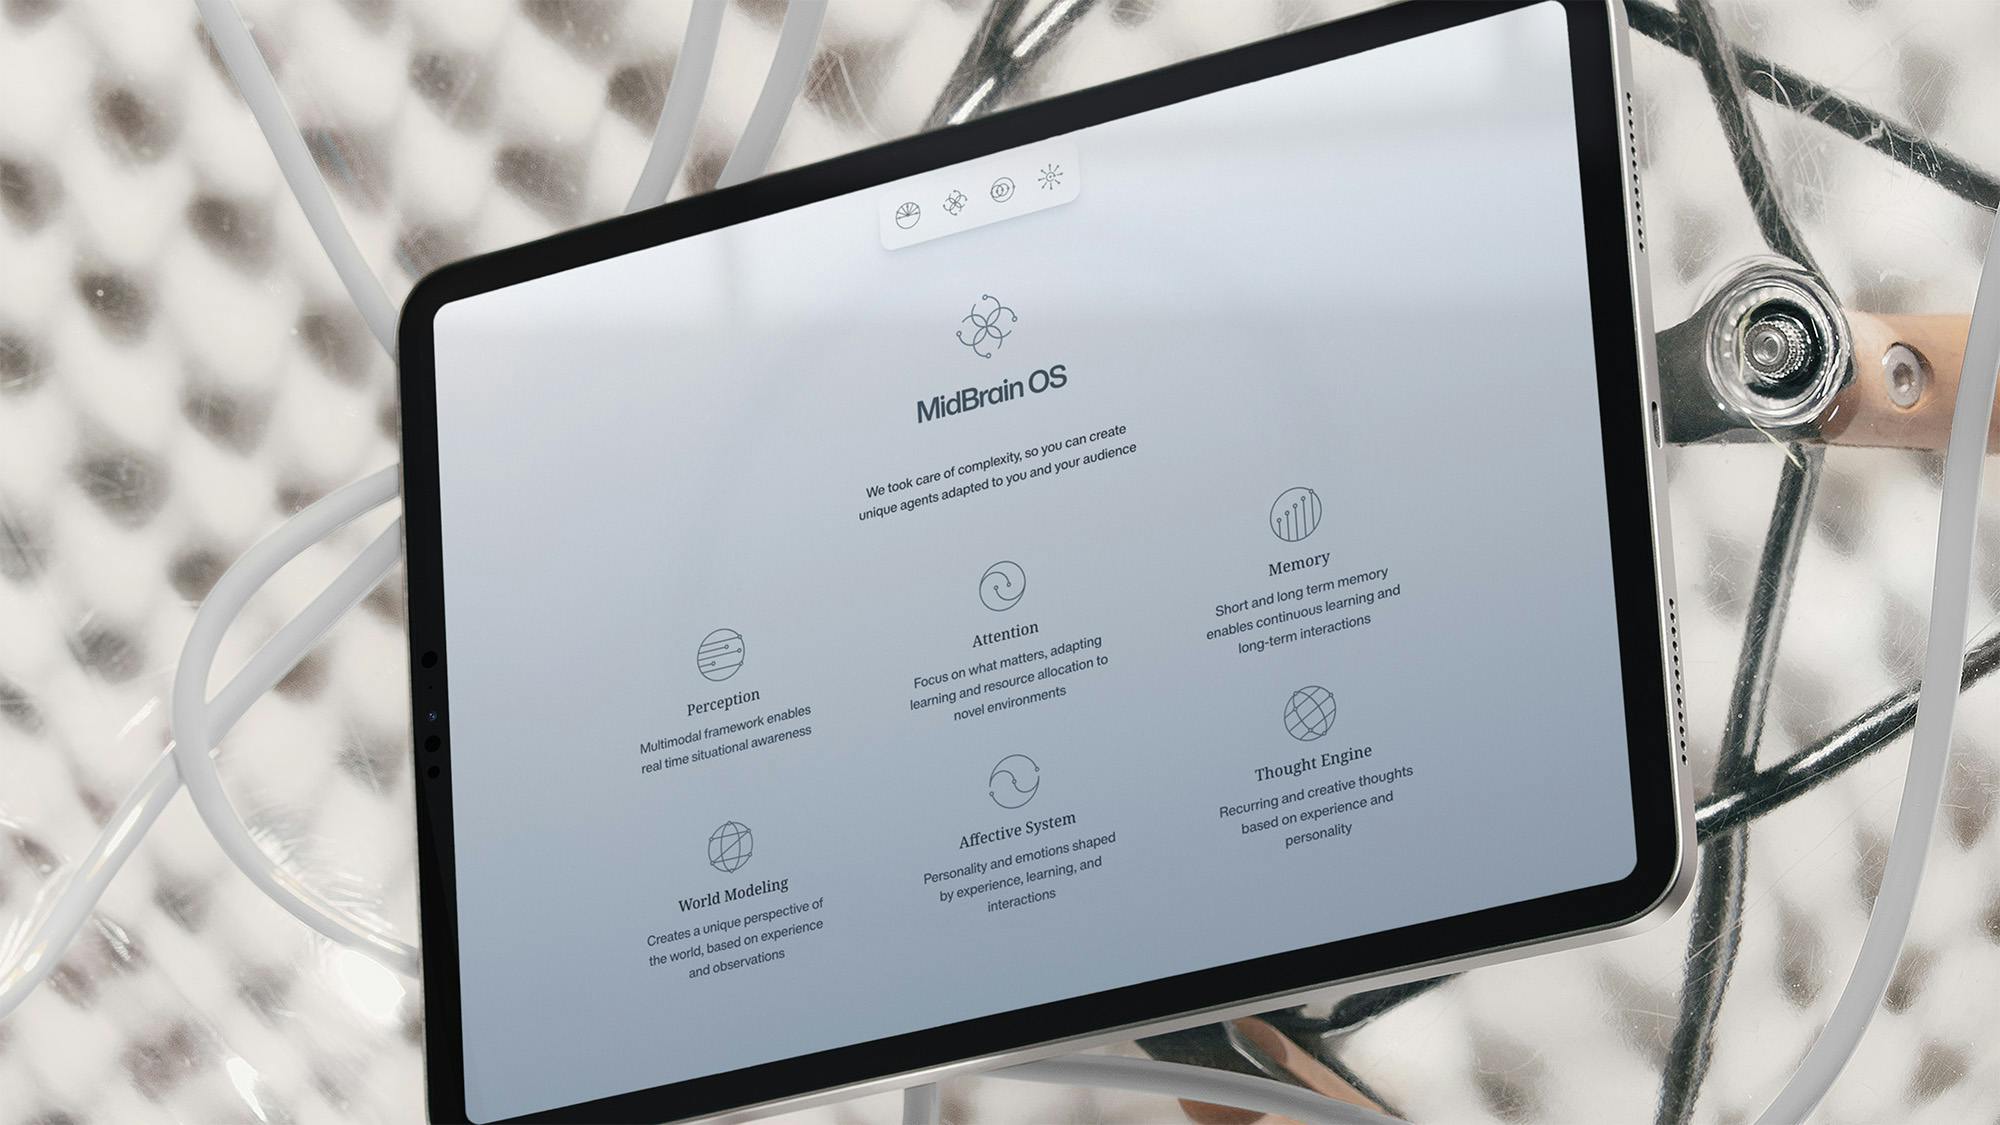 Landing page for an AI startup, displayed on tablet